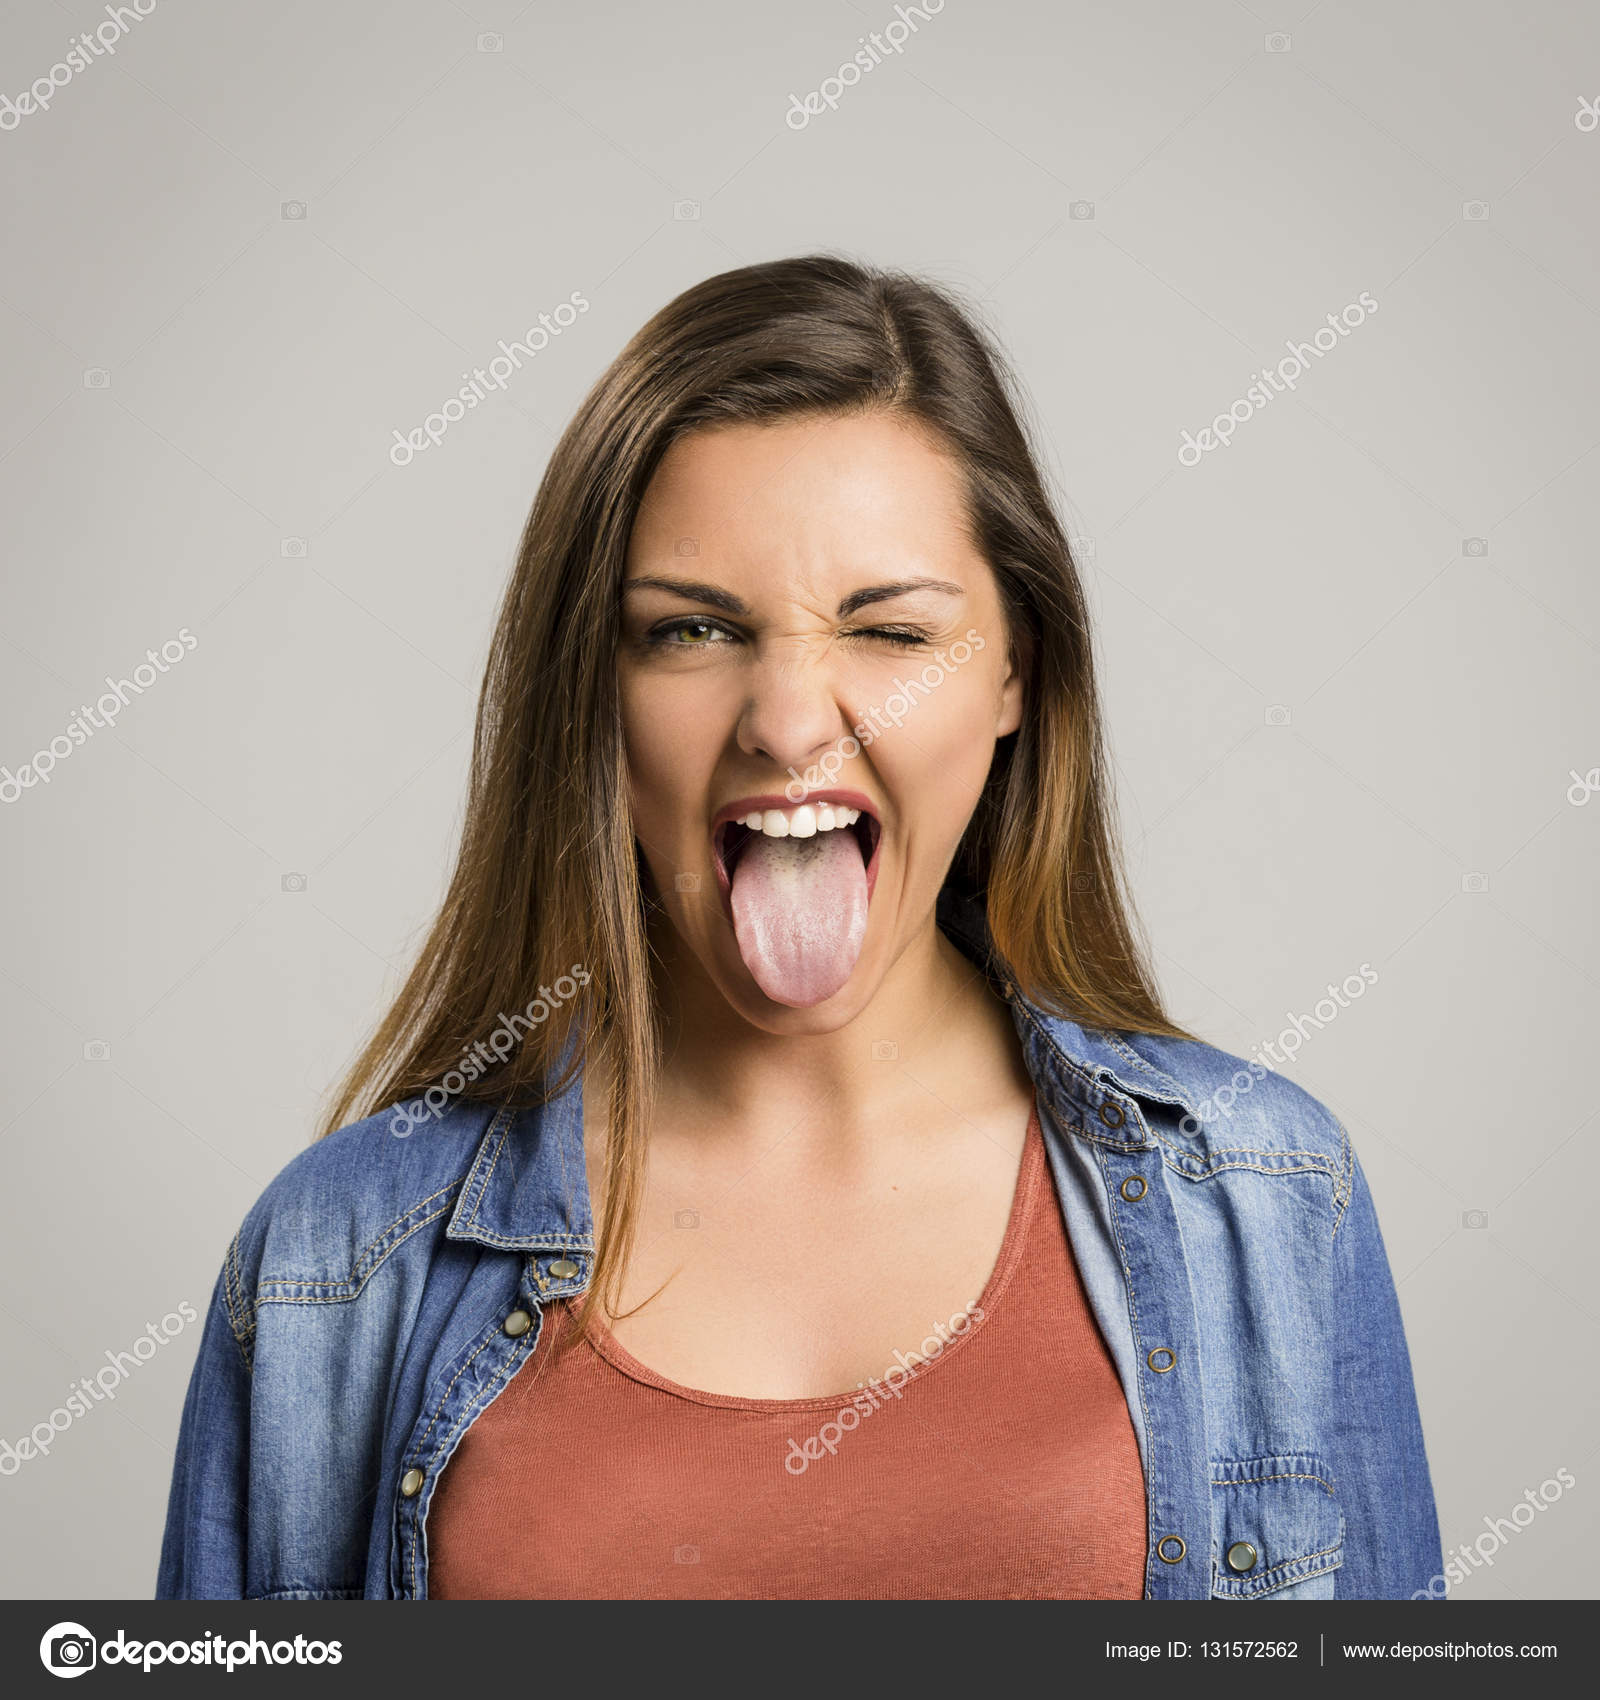 Woman showing tongue out — Stock Photo © ikostudio #131572562